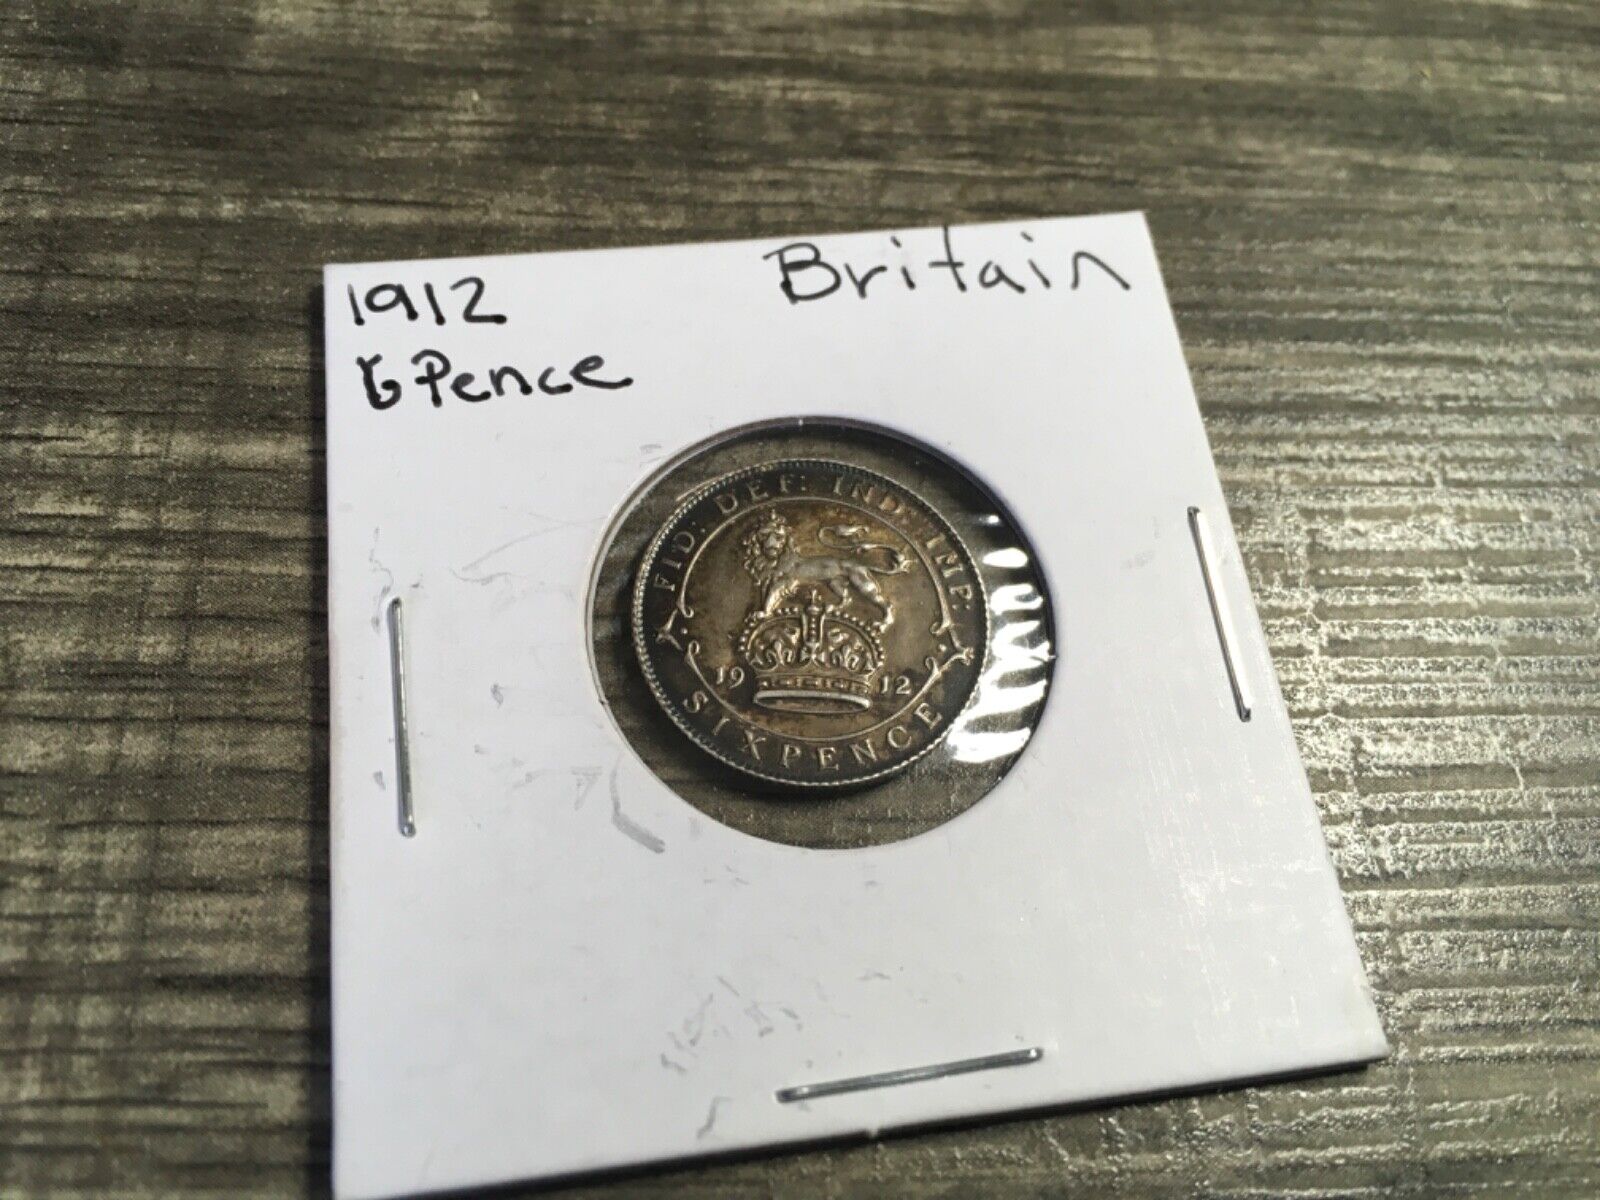 1912 Great Britain 6 Pence great details and patina # 2943s 🇬🇧